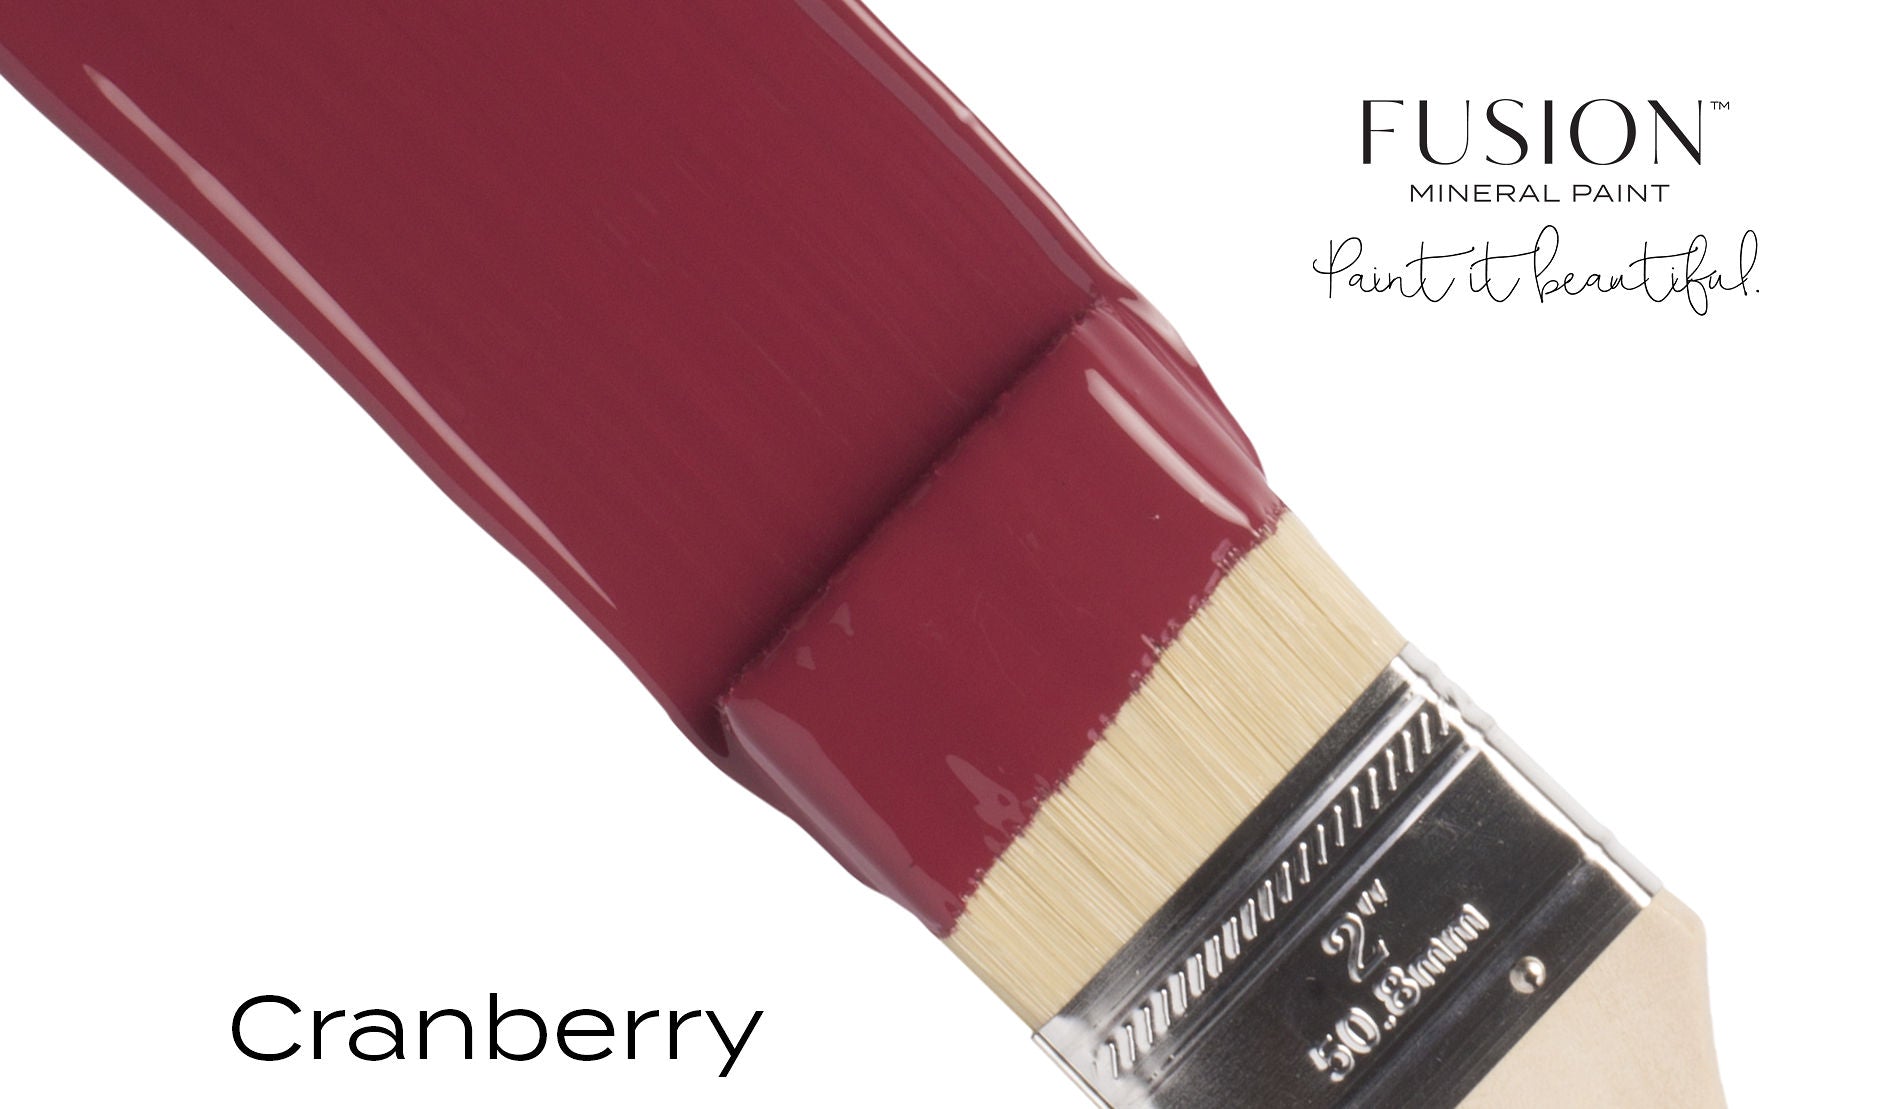 Fusion Mineral Paint Cranberry brush